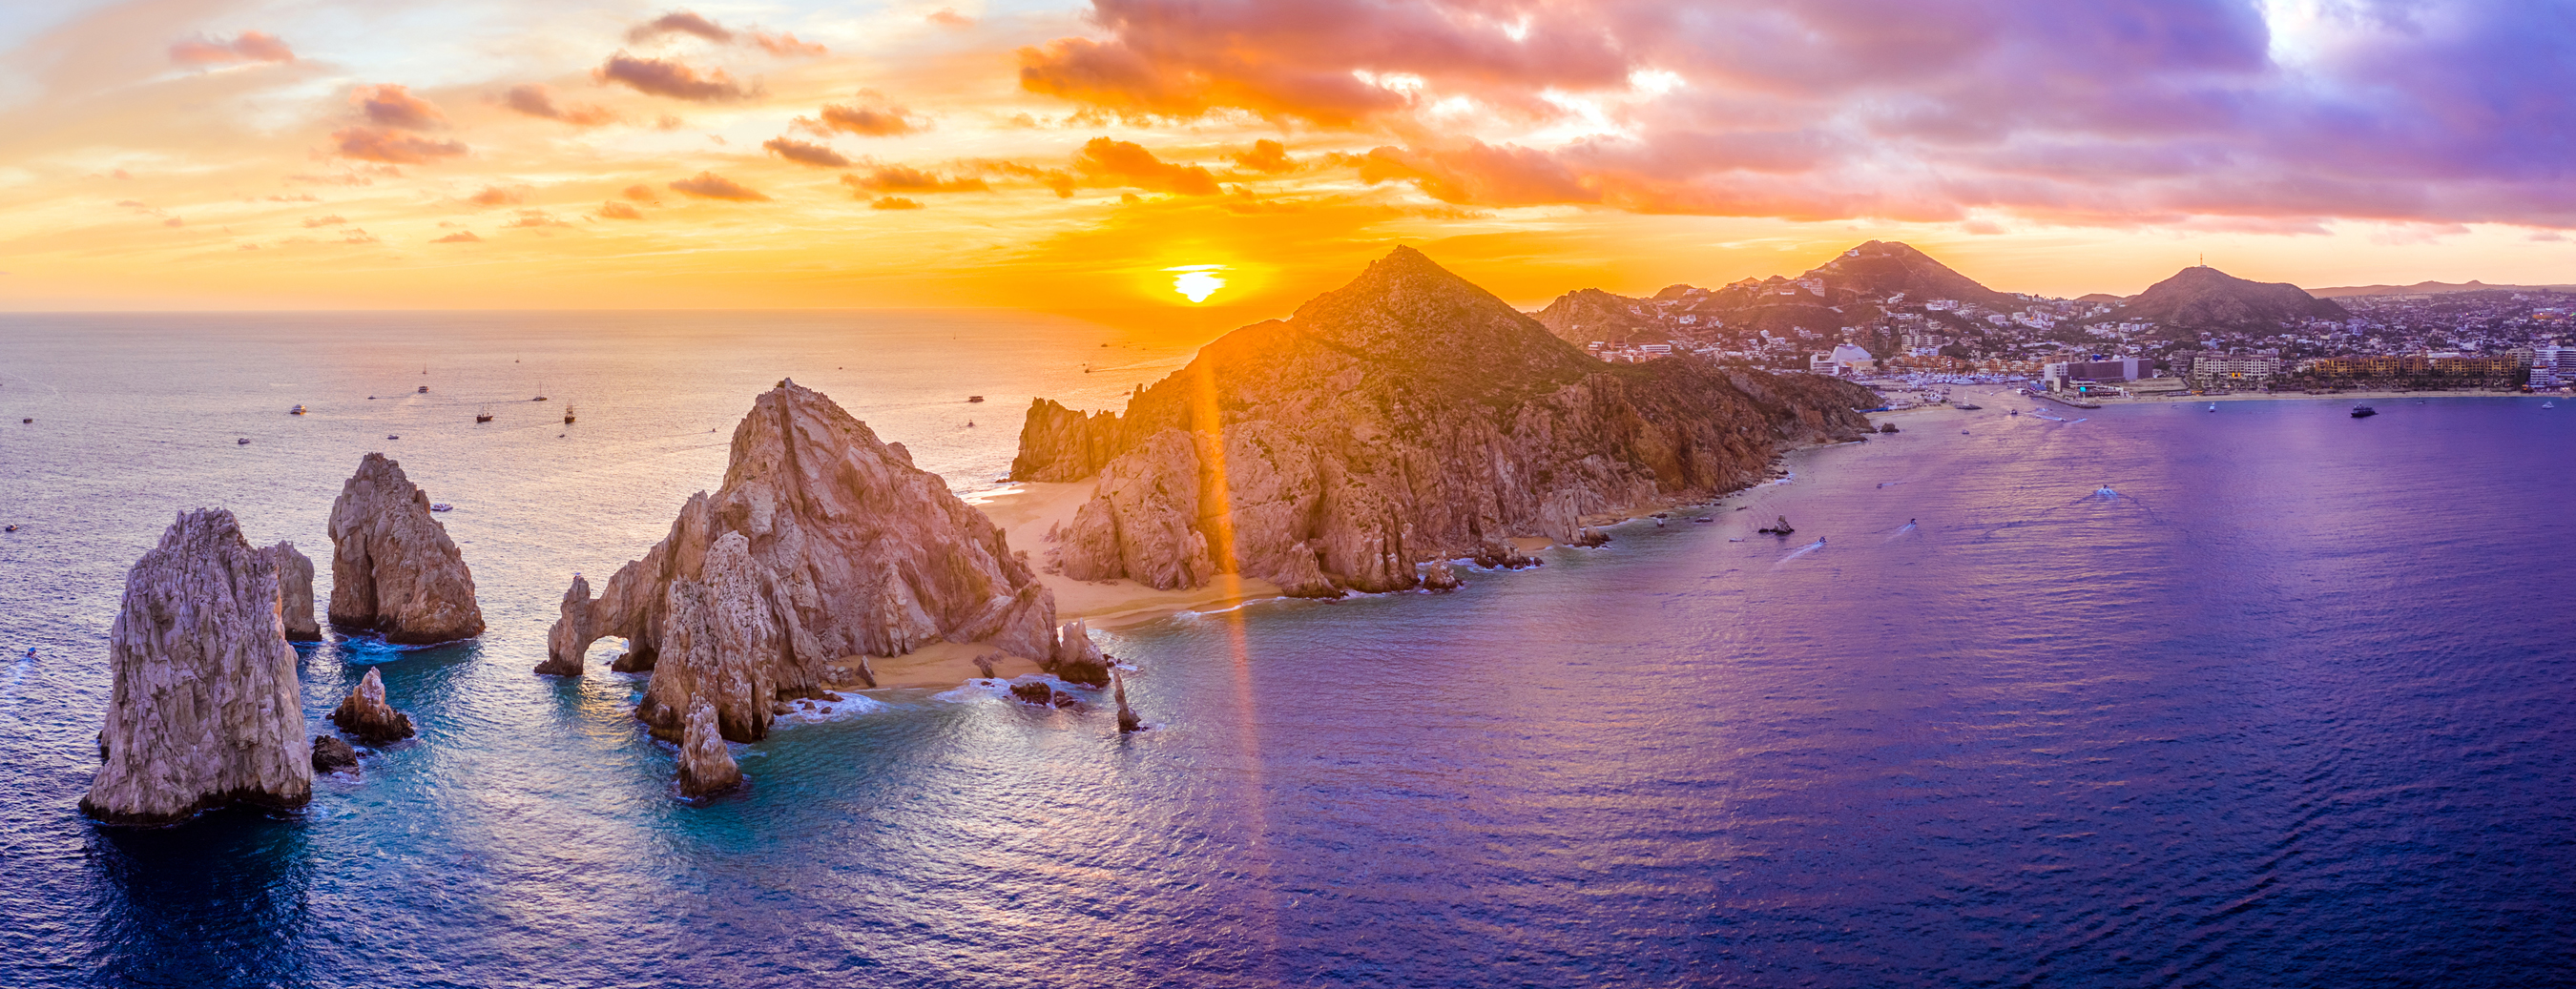 Everything You Need to Know for Your Cruise to Mexico and Central